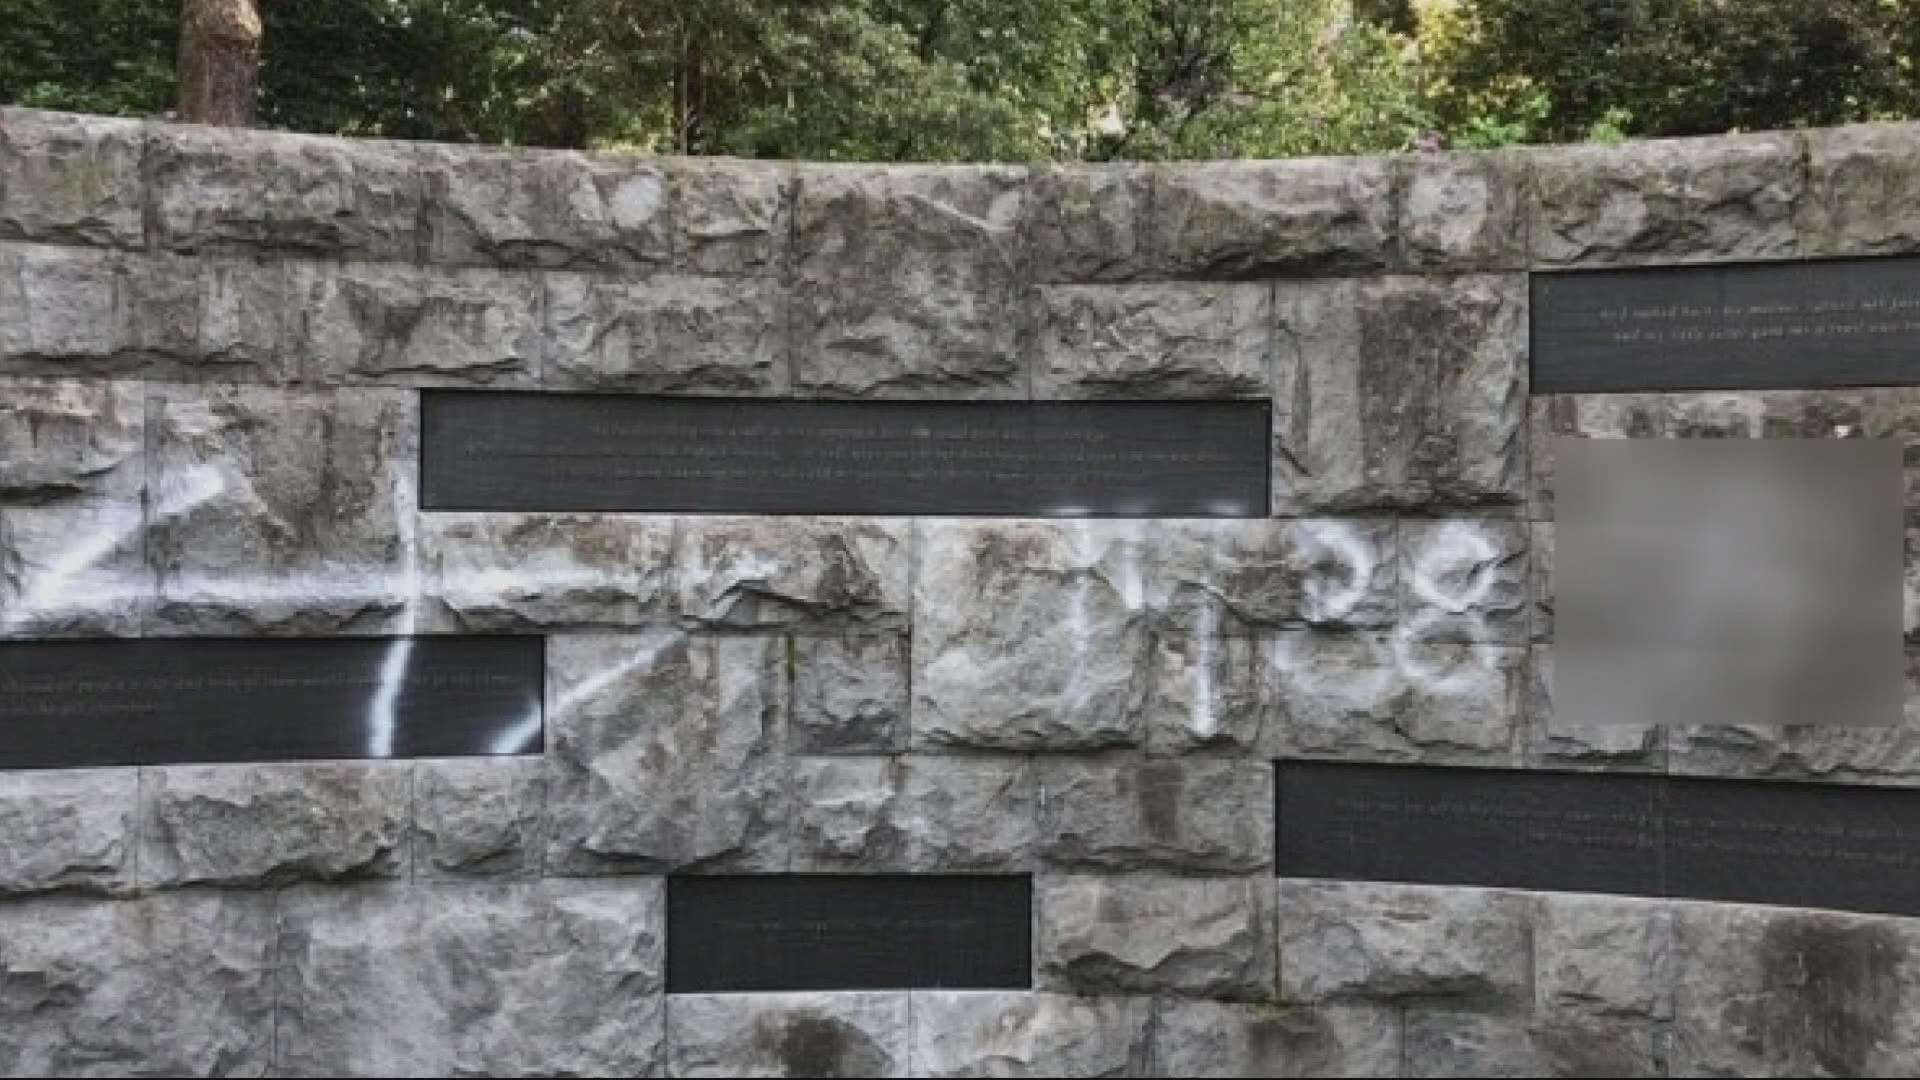 Vandals spray-painted swastikas and other graffiti on the Oregon Holocaust Memorial in Portland. Morgan Romero reports.